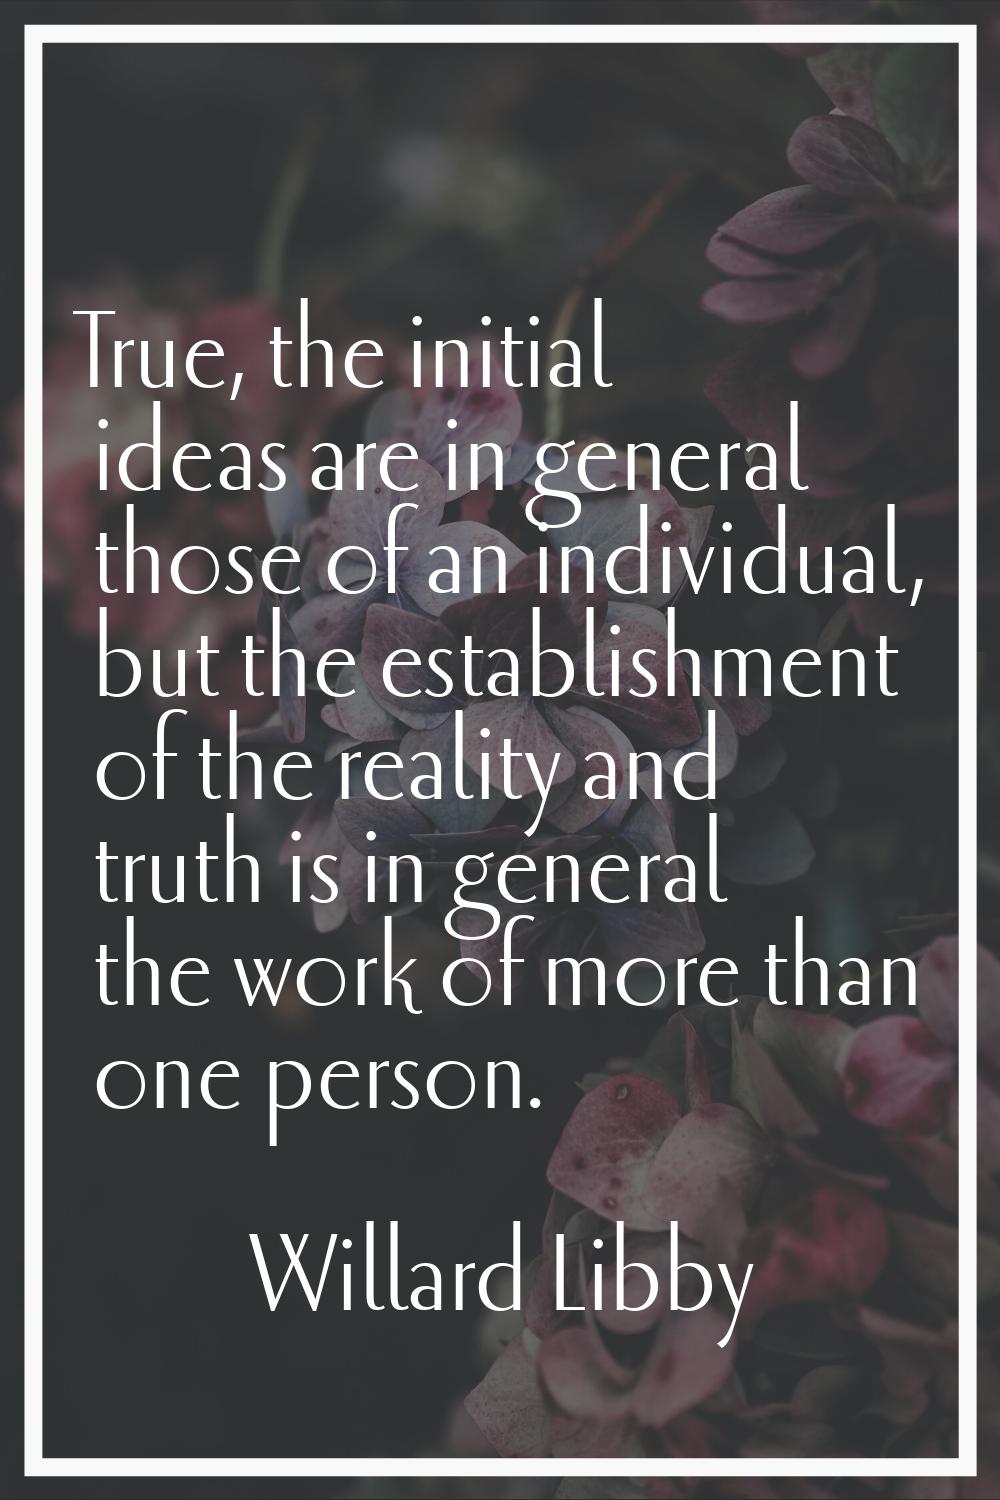 True, the initial ideas are in general those of an individual, but the establishment of the reality